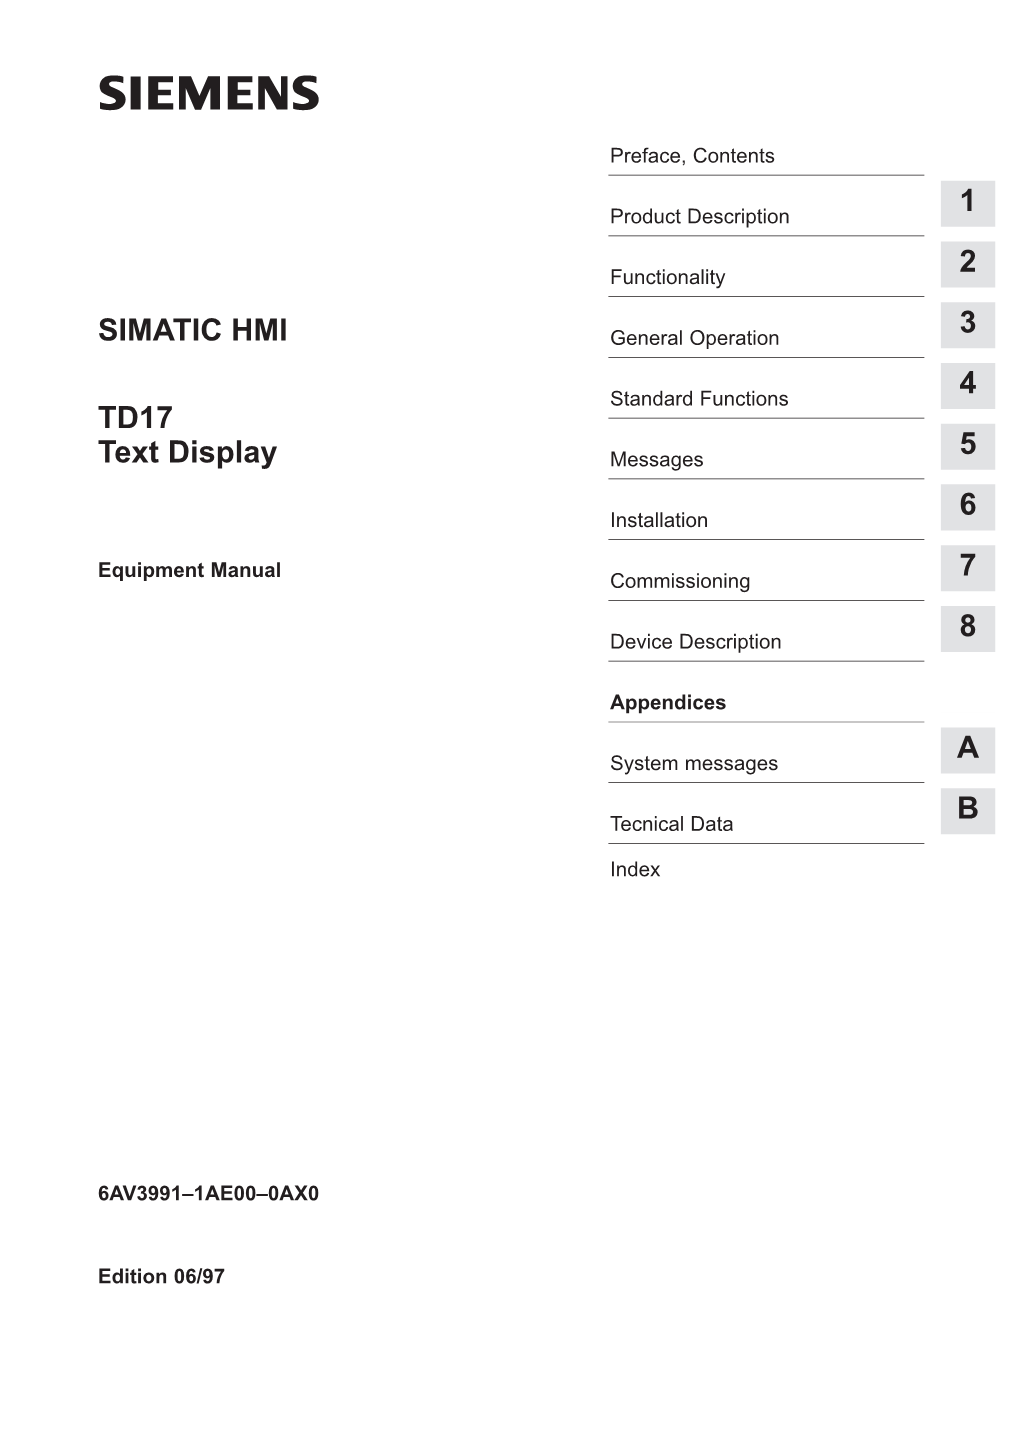 Text Display TD17, You Can Visualize the Operating States, Malfunctions TD17 and Current Process Values of a Connected PLC